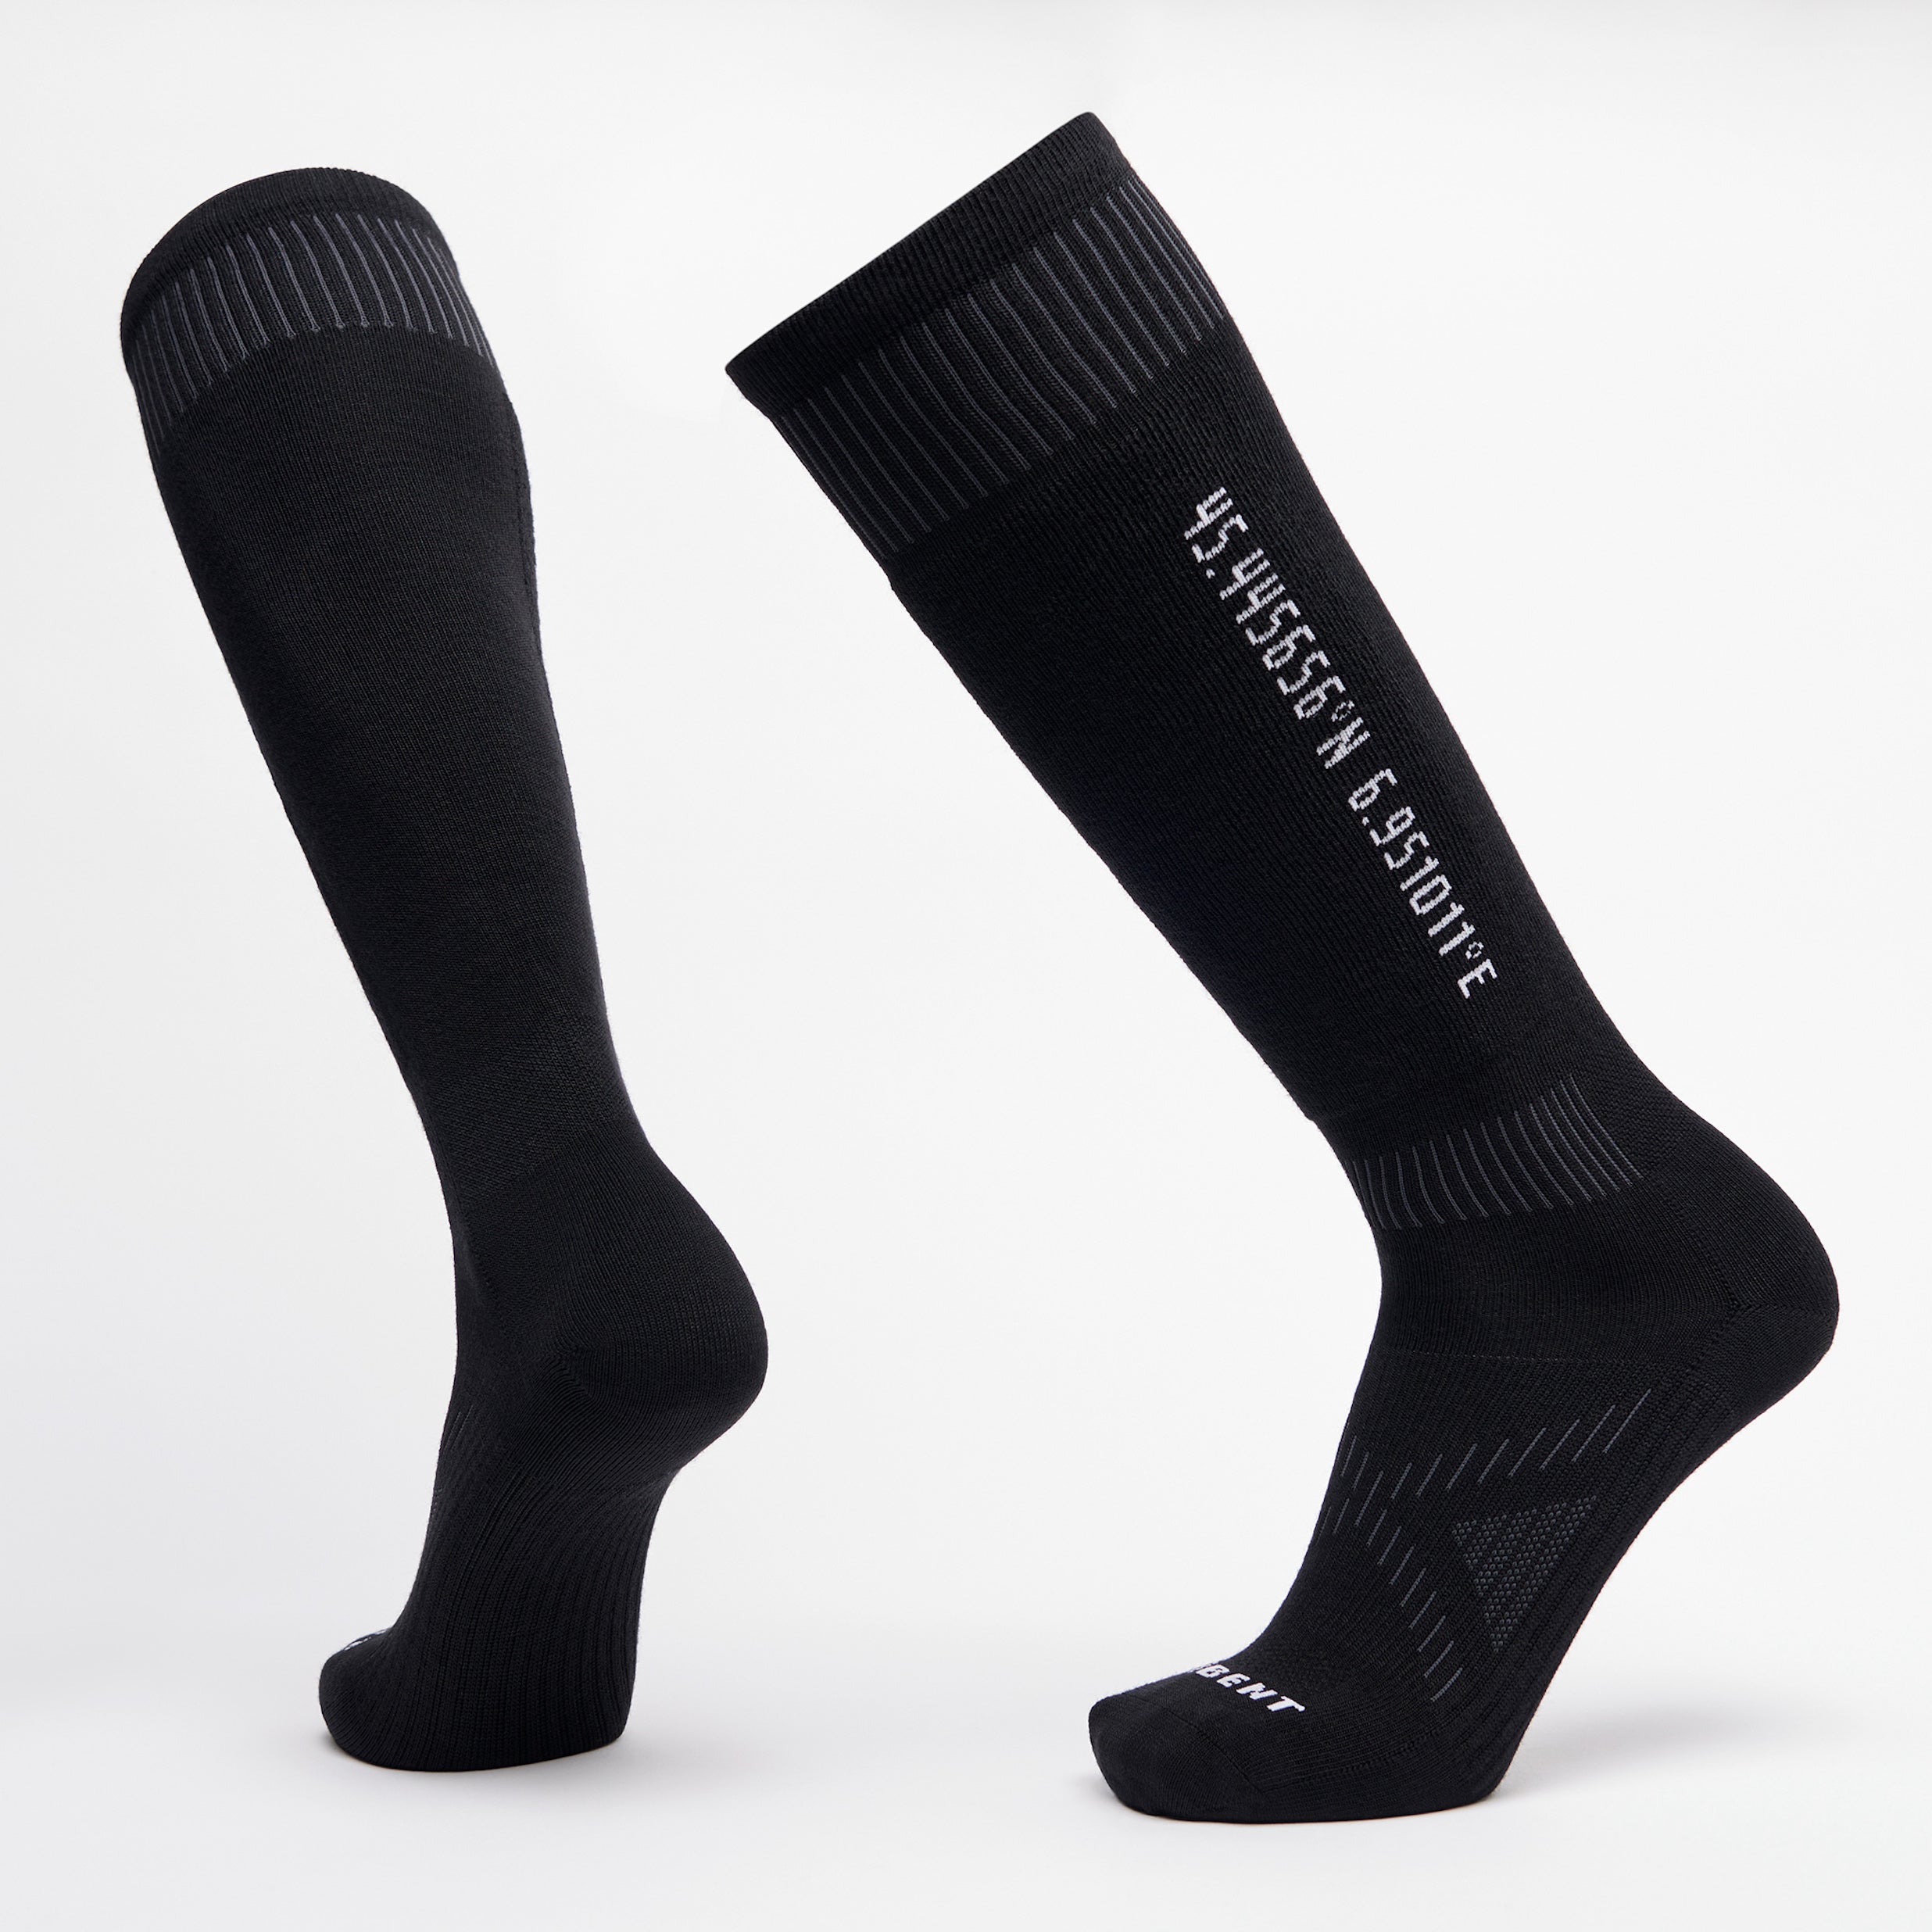 Black ski socks with cushion, ultra light and white coordinates inscribed on the side.